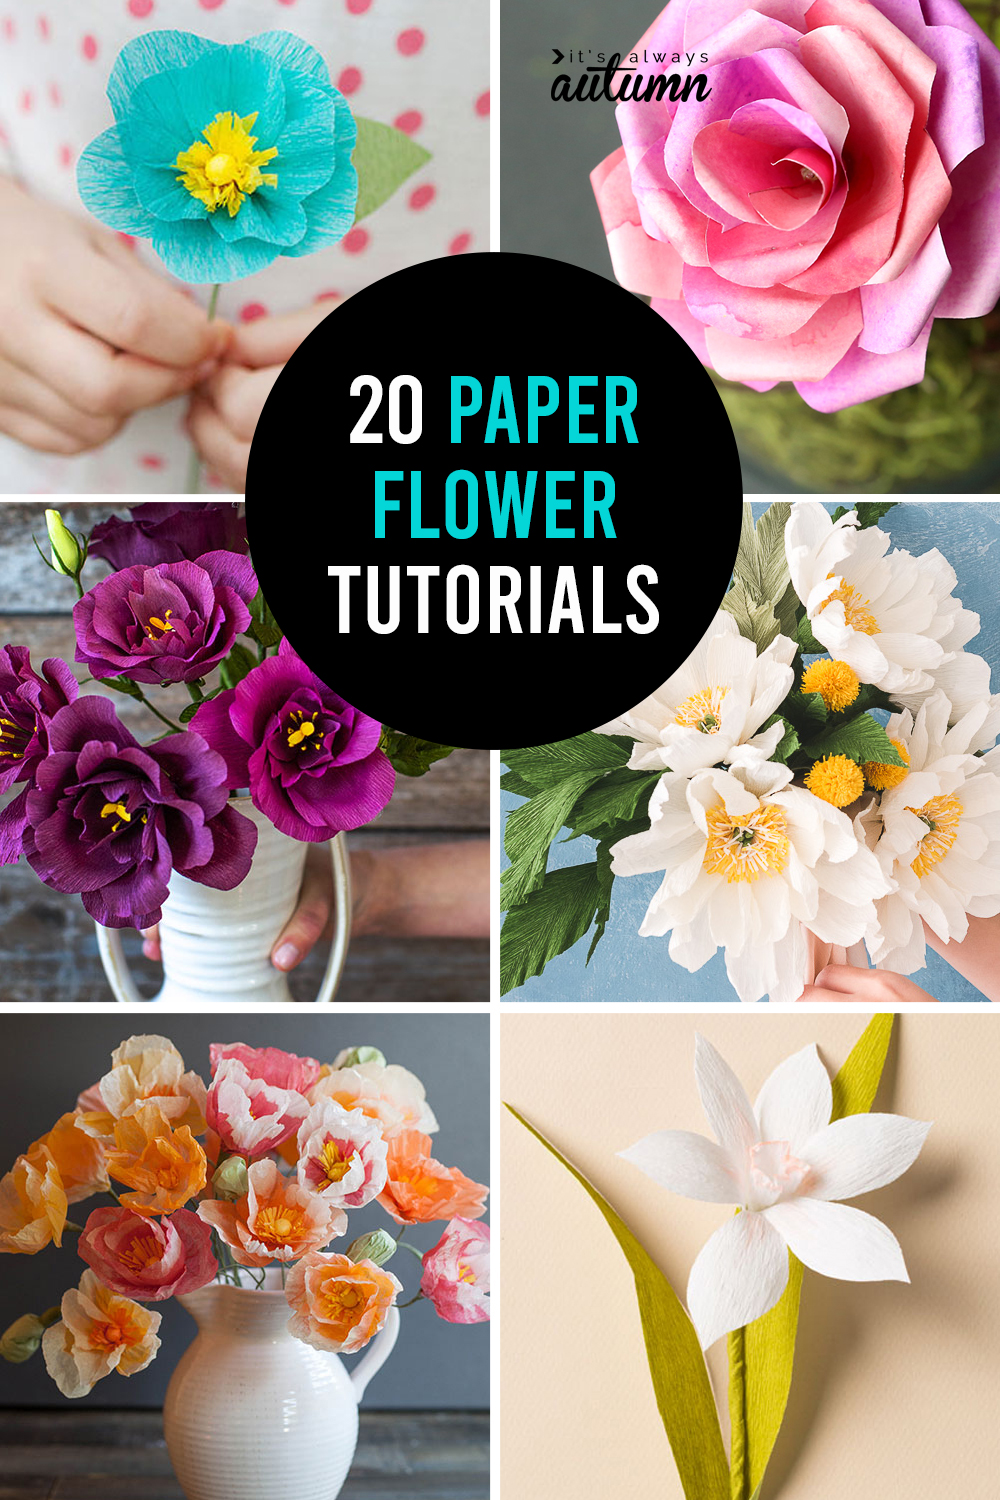 How to make paper flowers - 20 gorgeous DIY paper flower tutorials